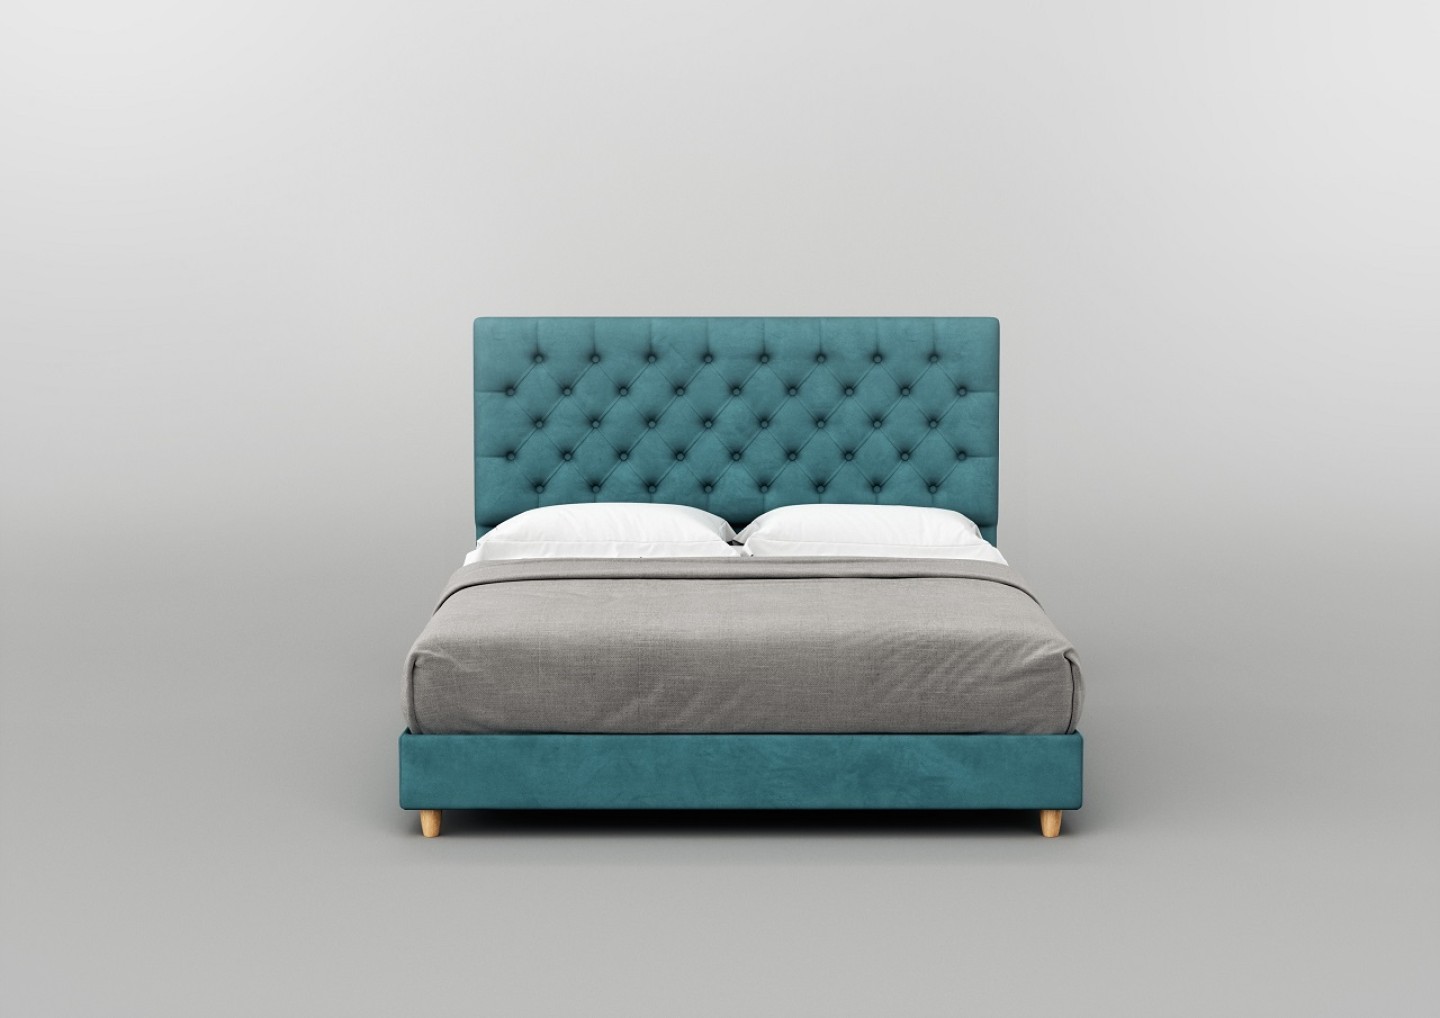 THE QUEEN BED by Elite Strom